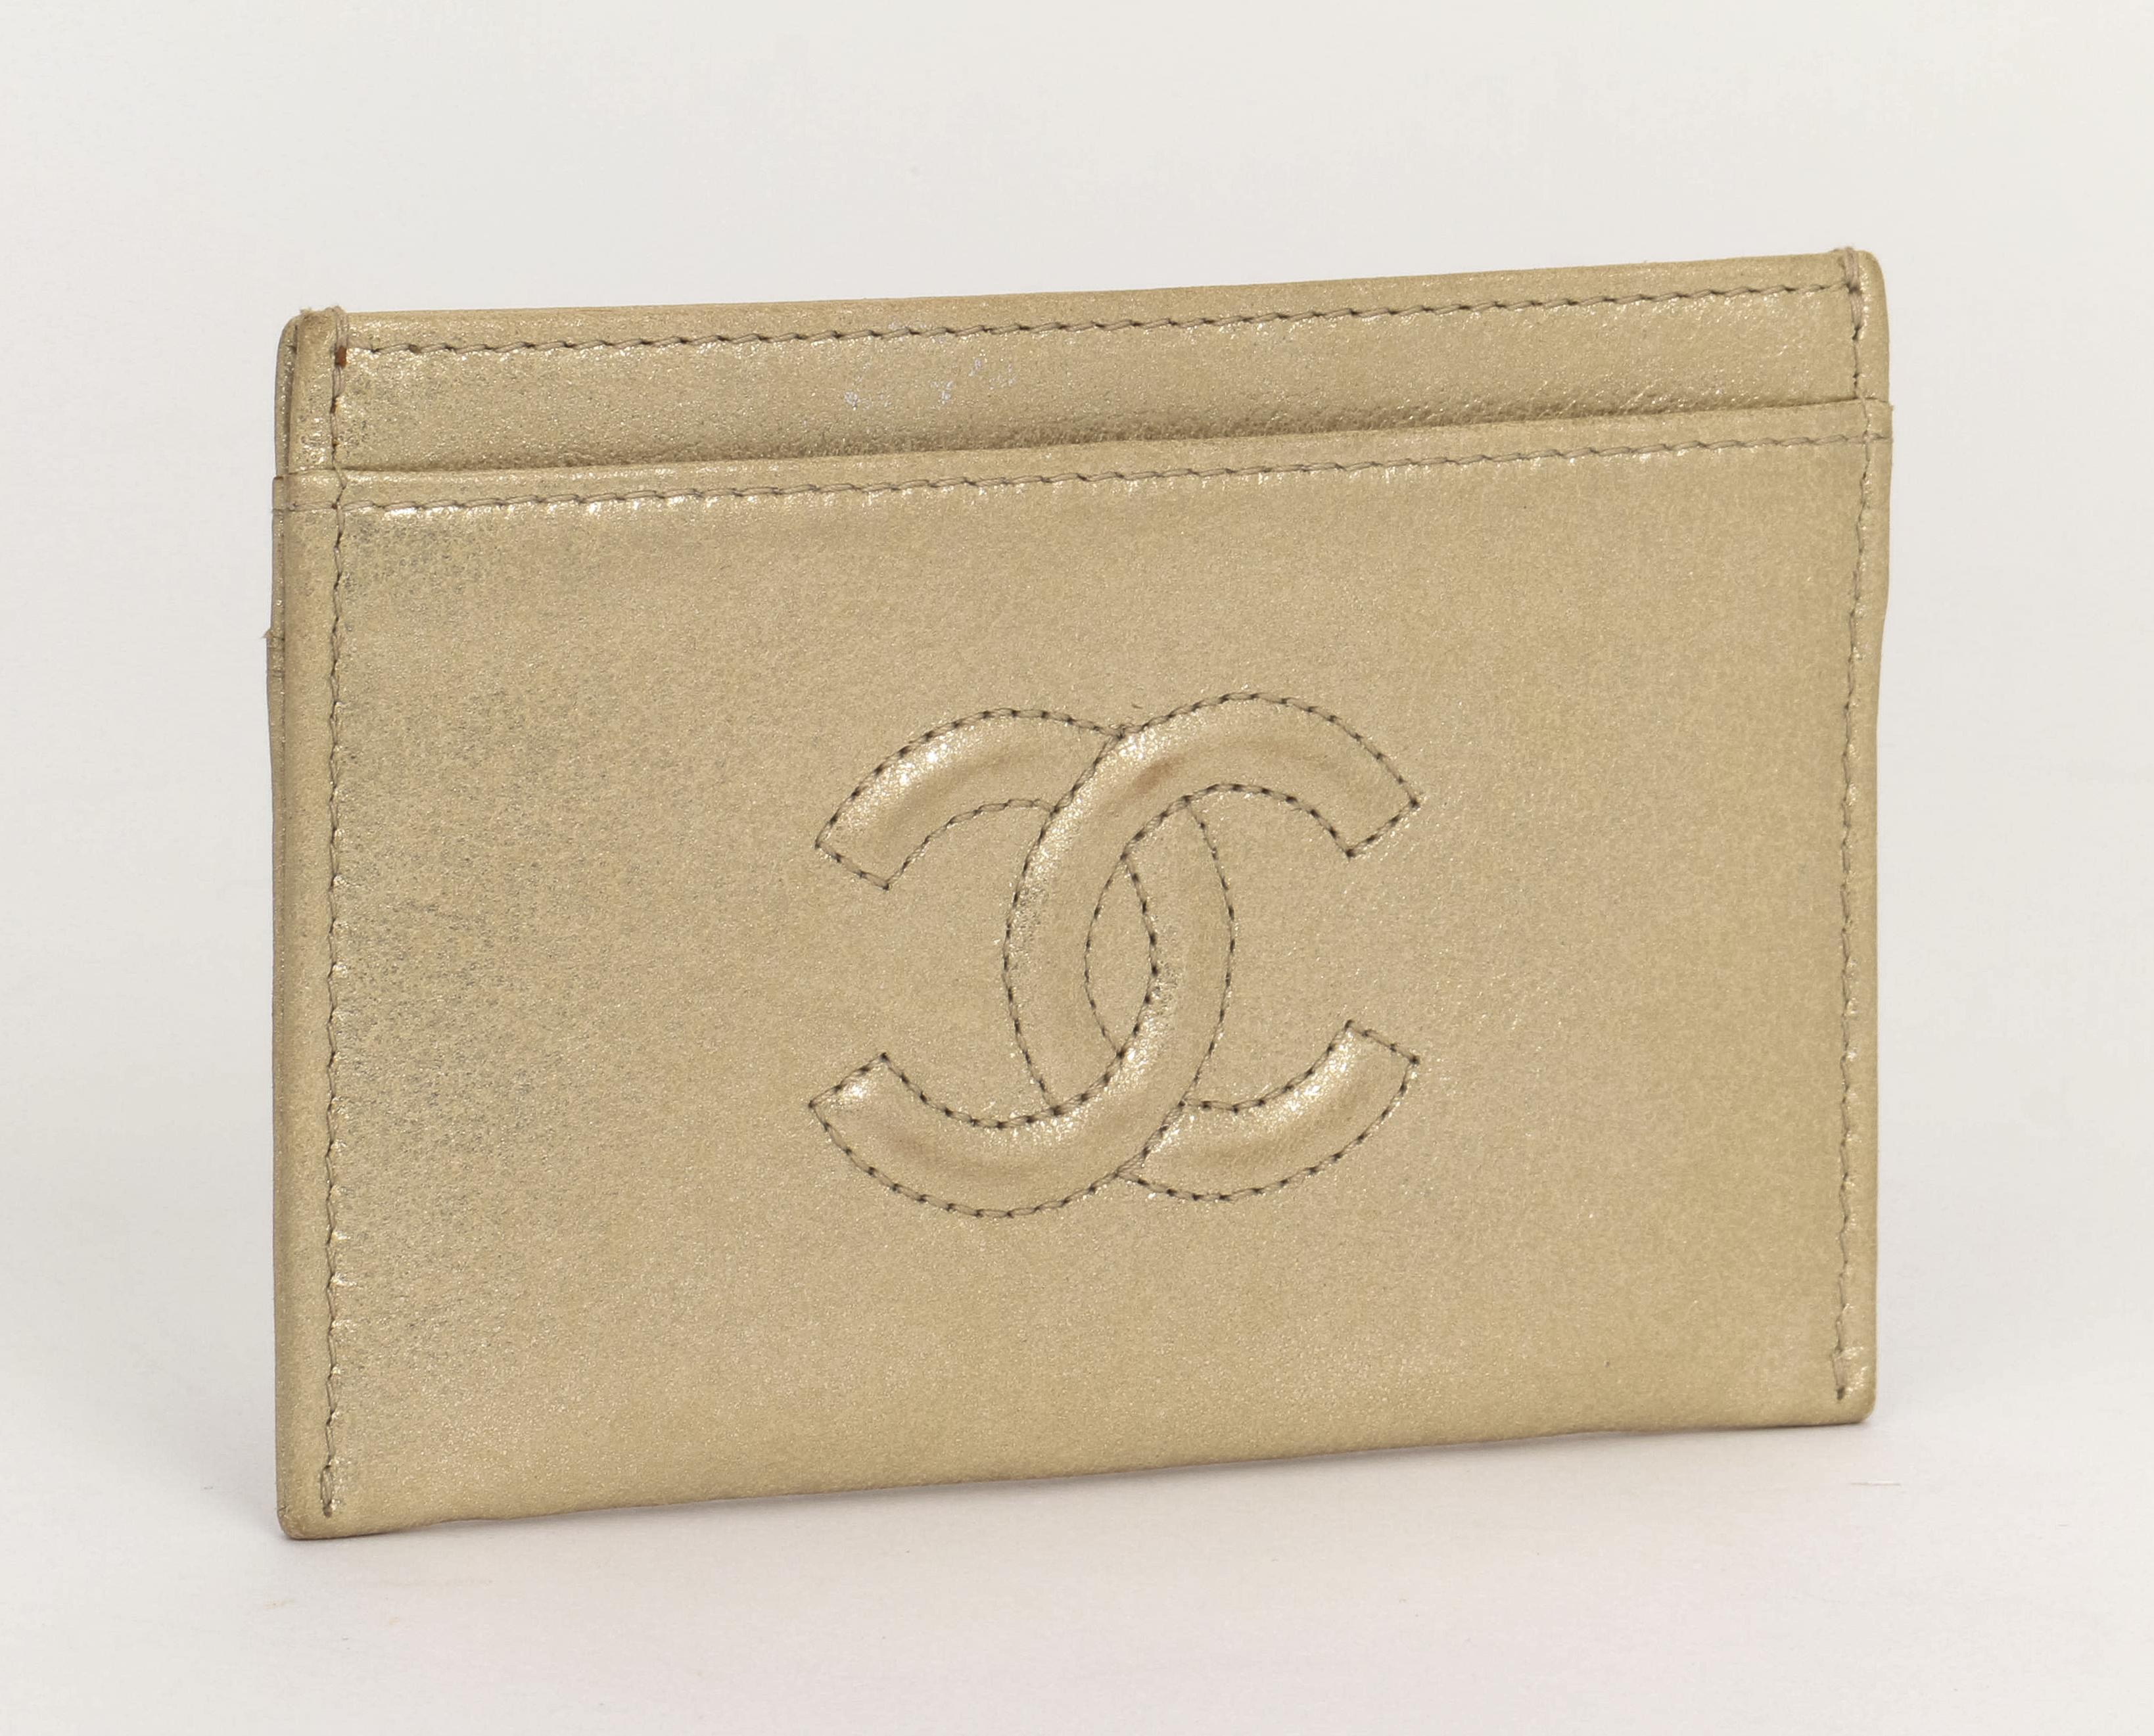 Chanel brand new card case light gold leather with original velvet pouch
